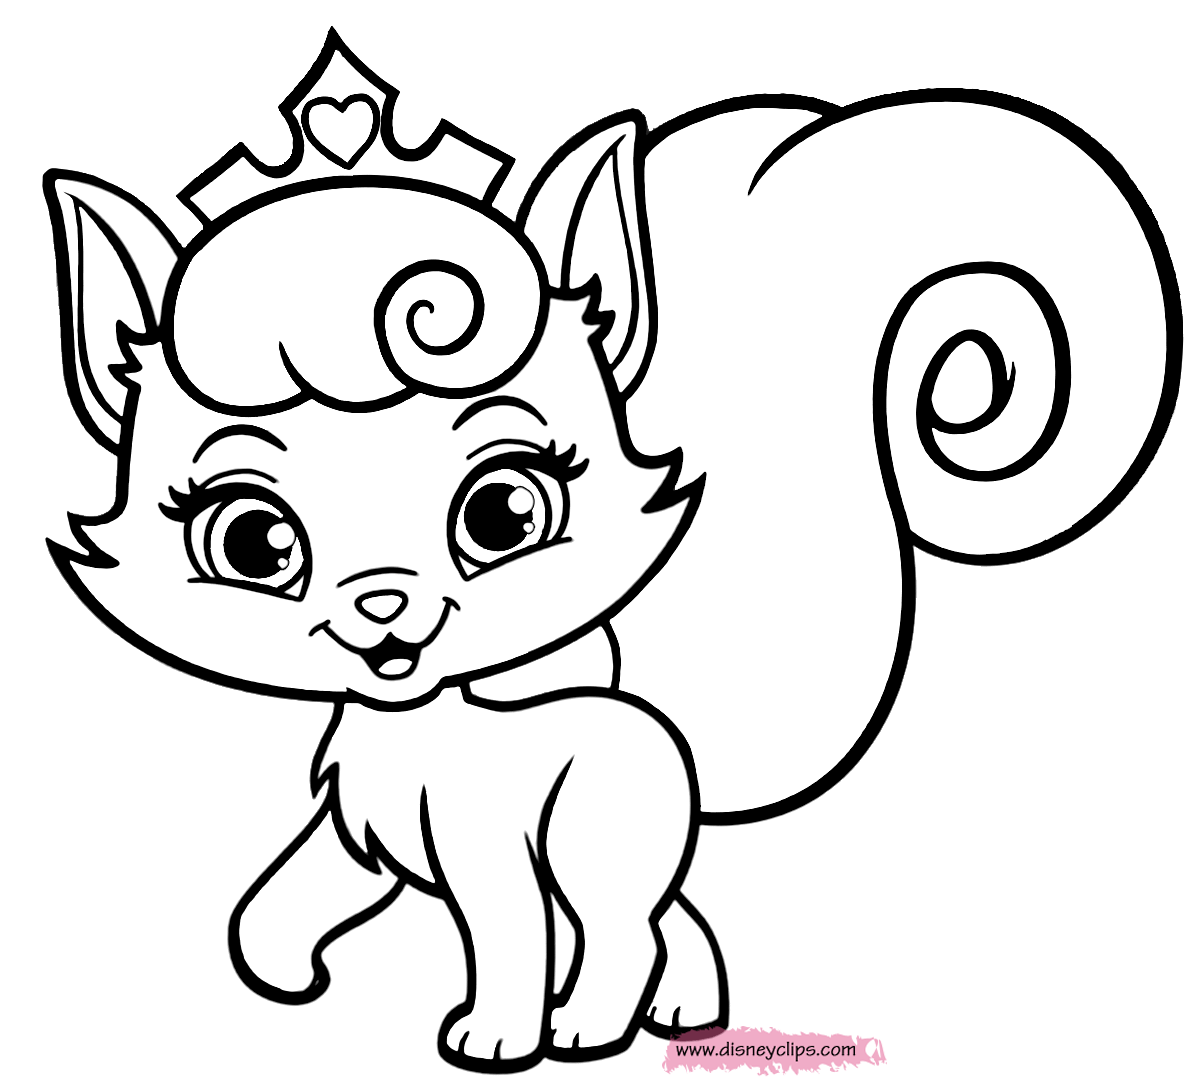 coloring-pages-cute-cats-at-getcolorings-free-printable-colorings-pages-to-print-and-color